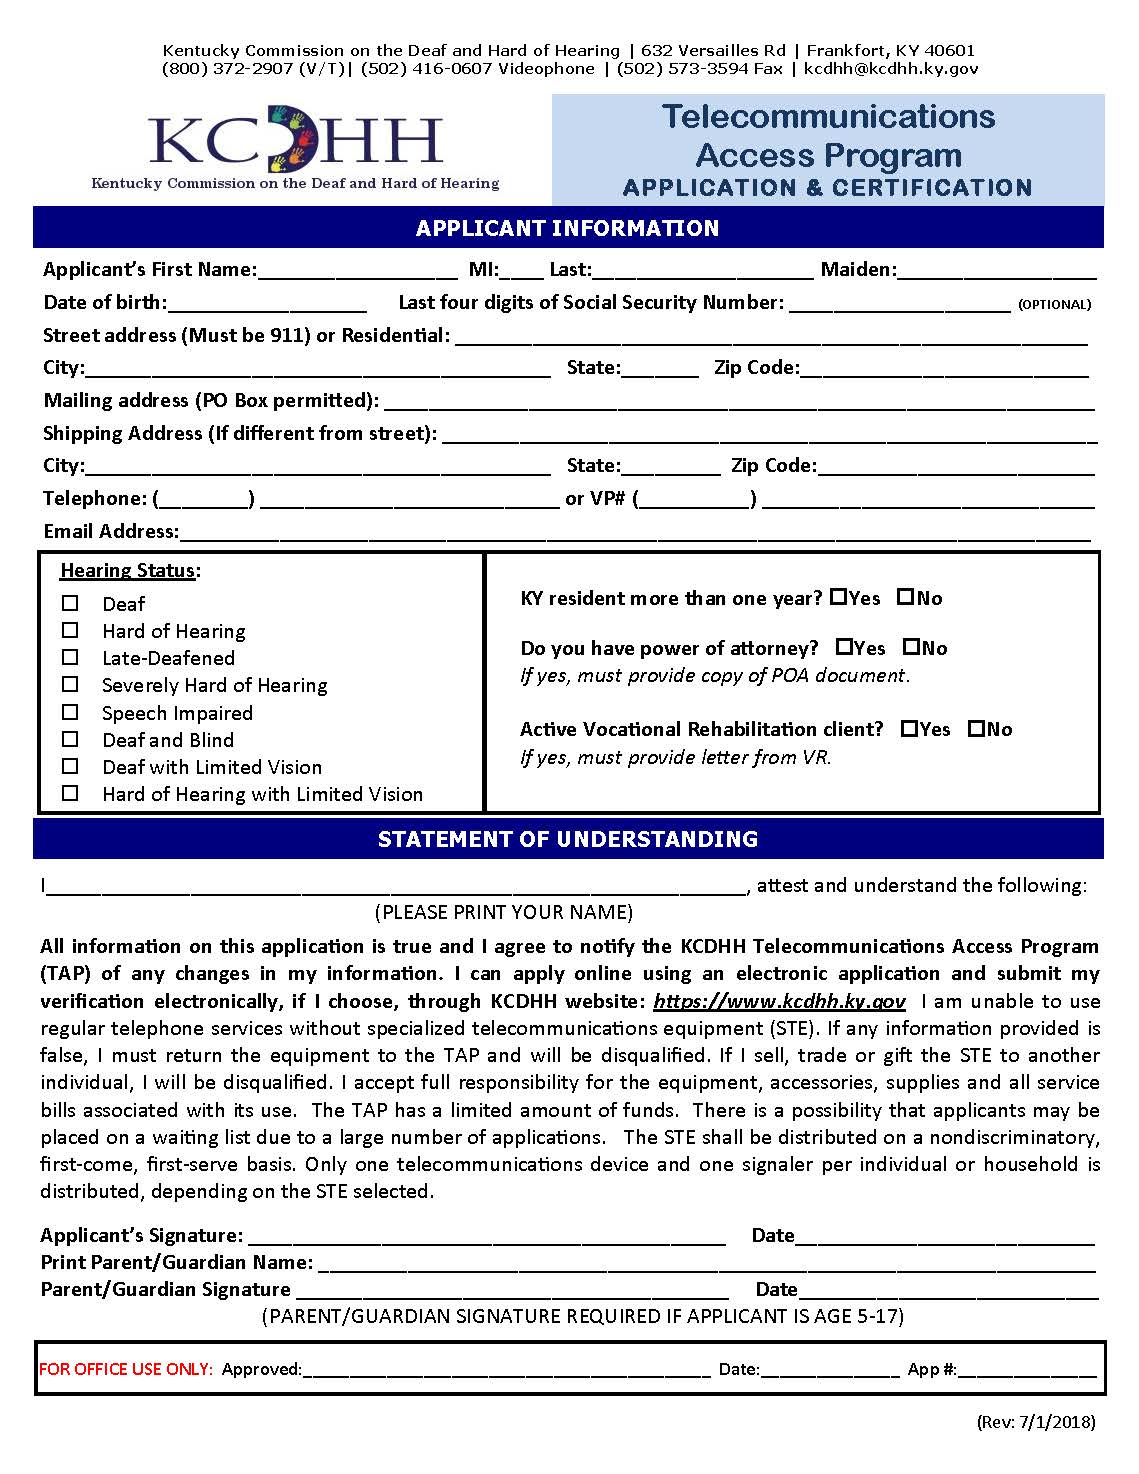 Picture of the page 1 of a KCDHH TAP application.